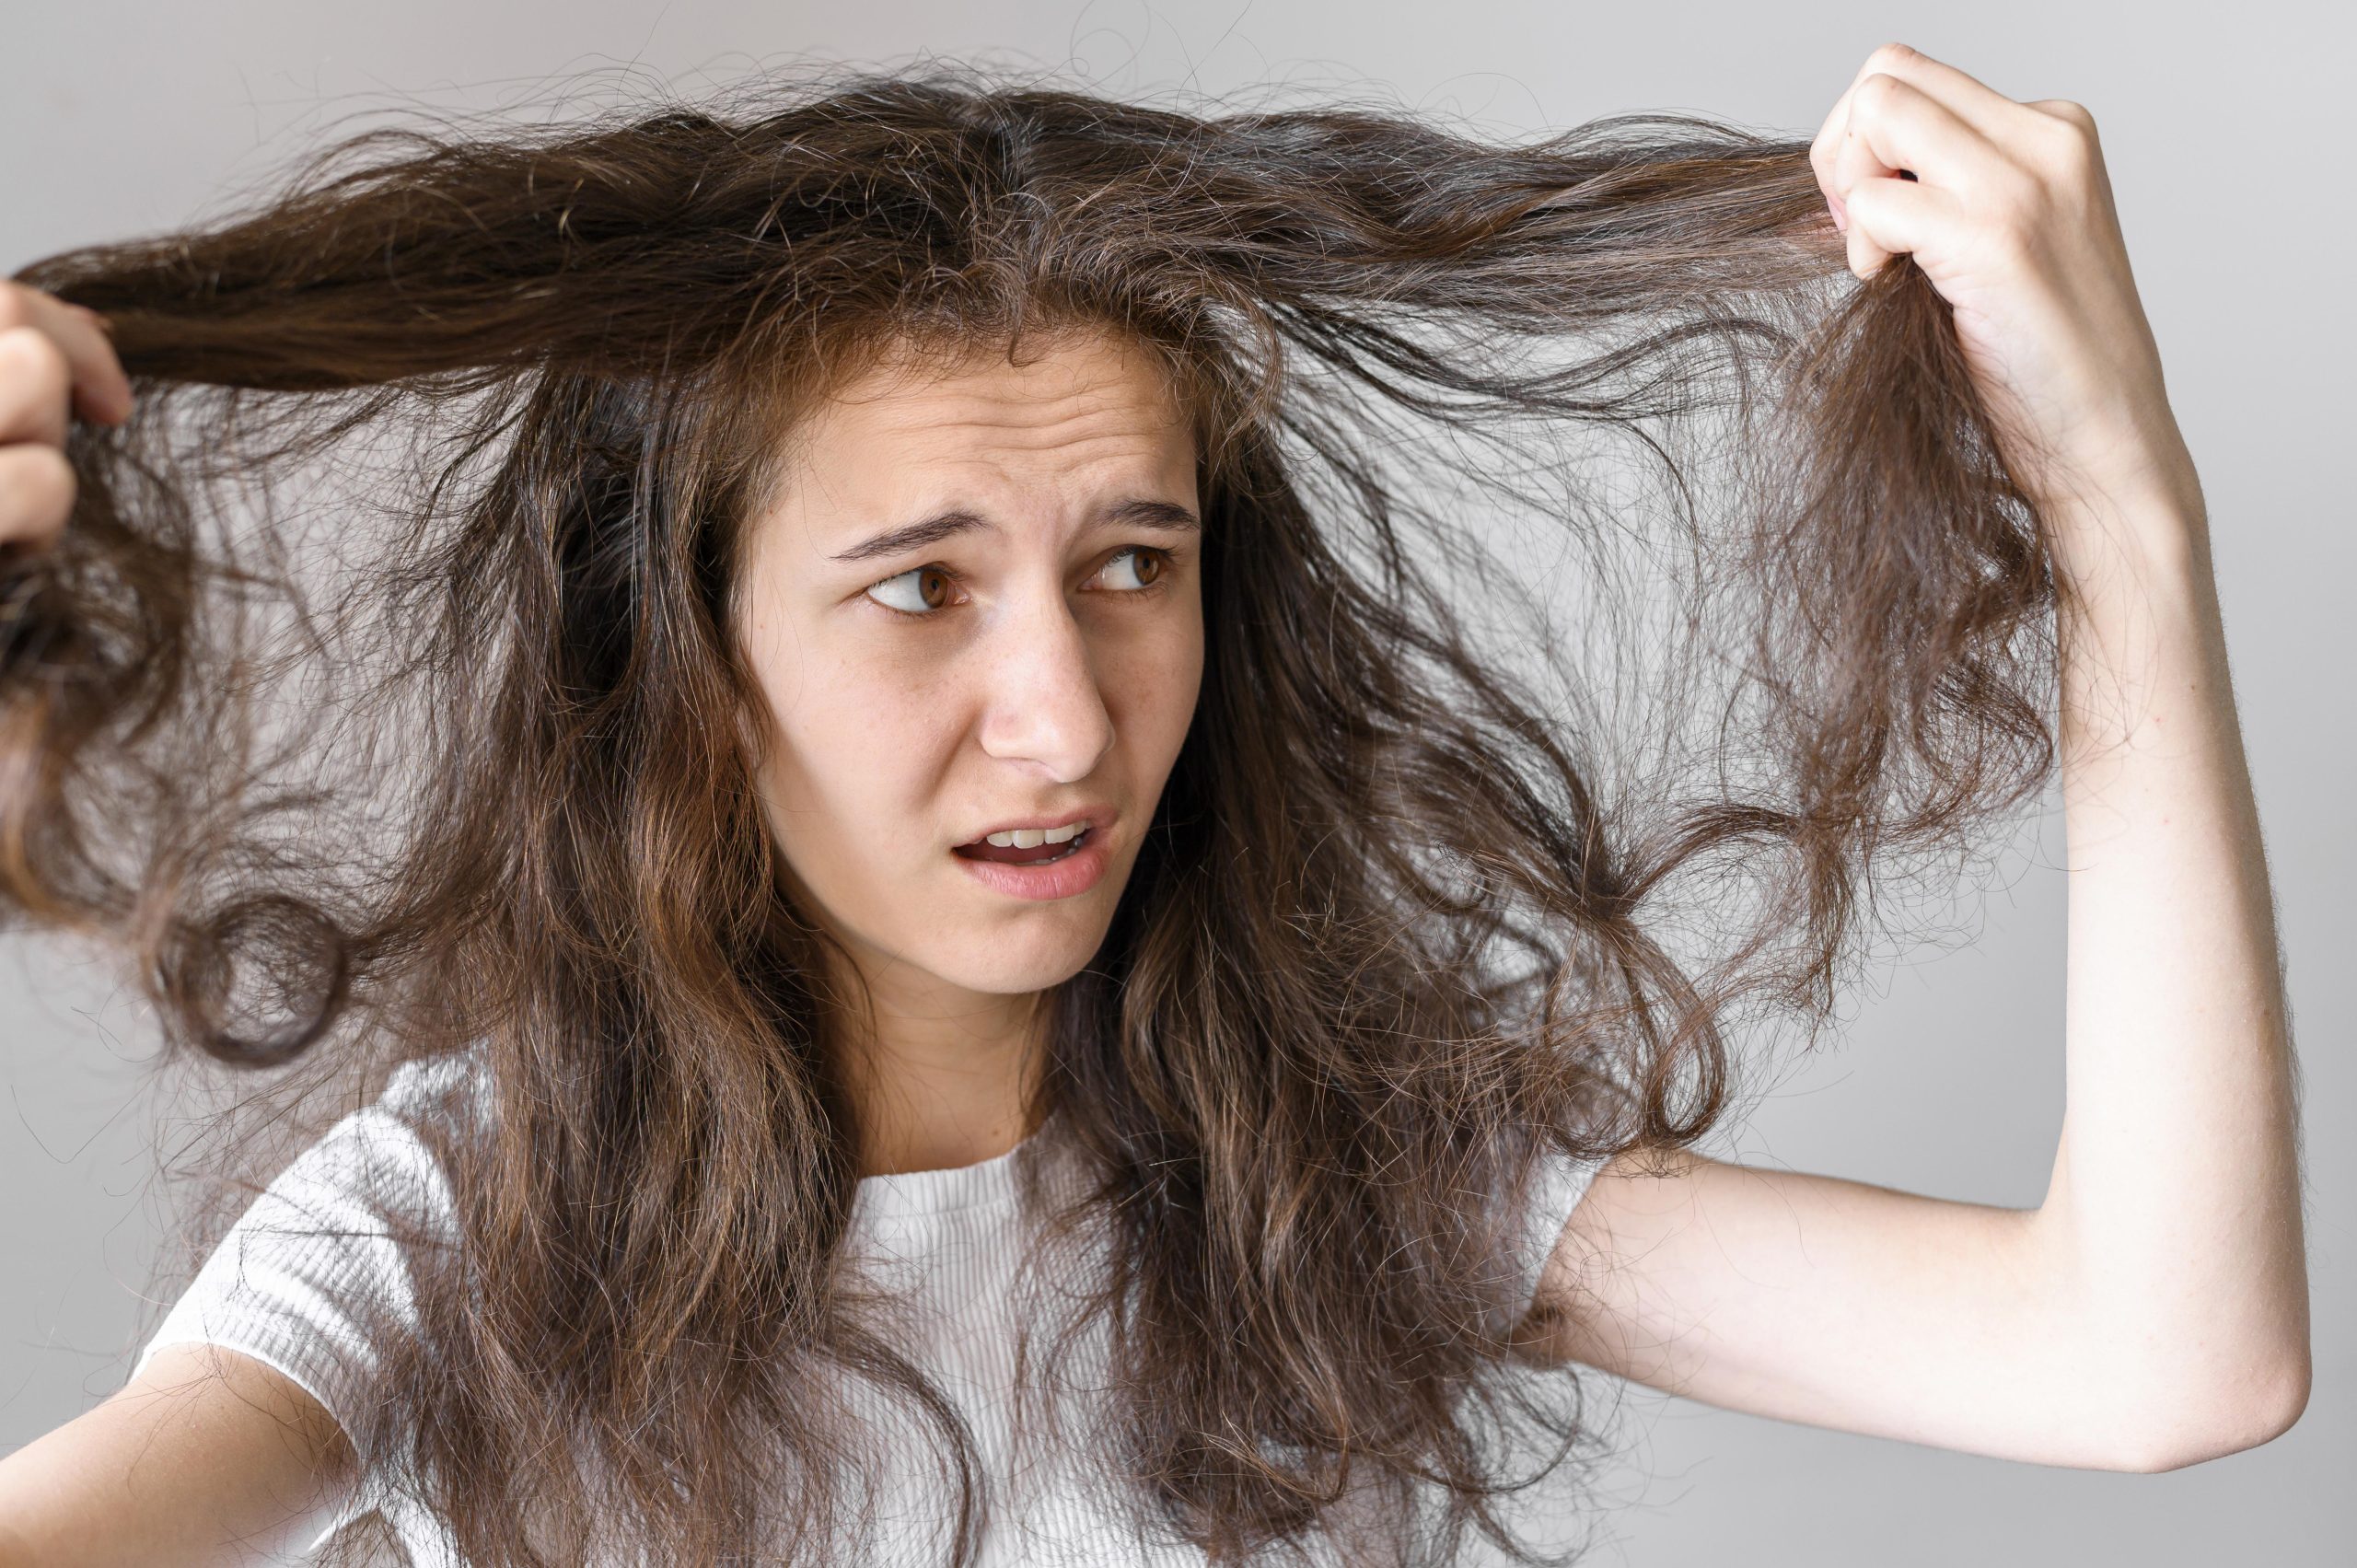 6 Secrets Your Hair Is Trying to Tell You